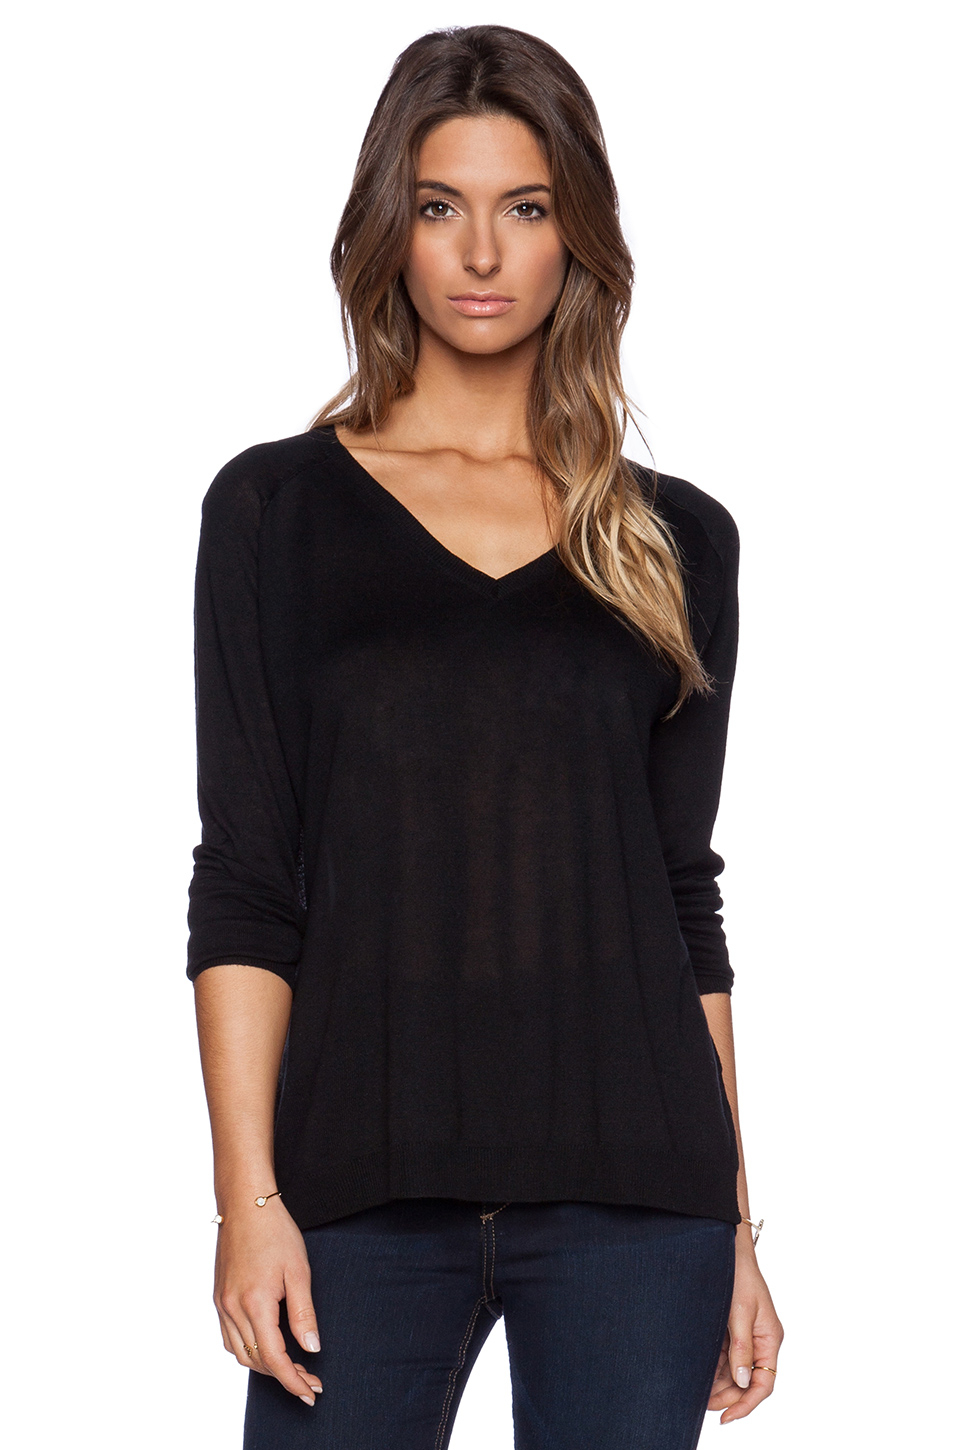 Lyst - Fine Collection Slouchy V Neck Sweater in Black